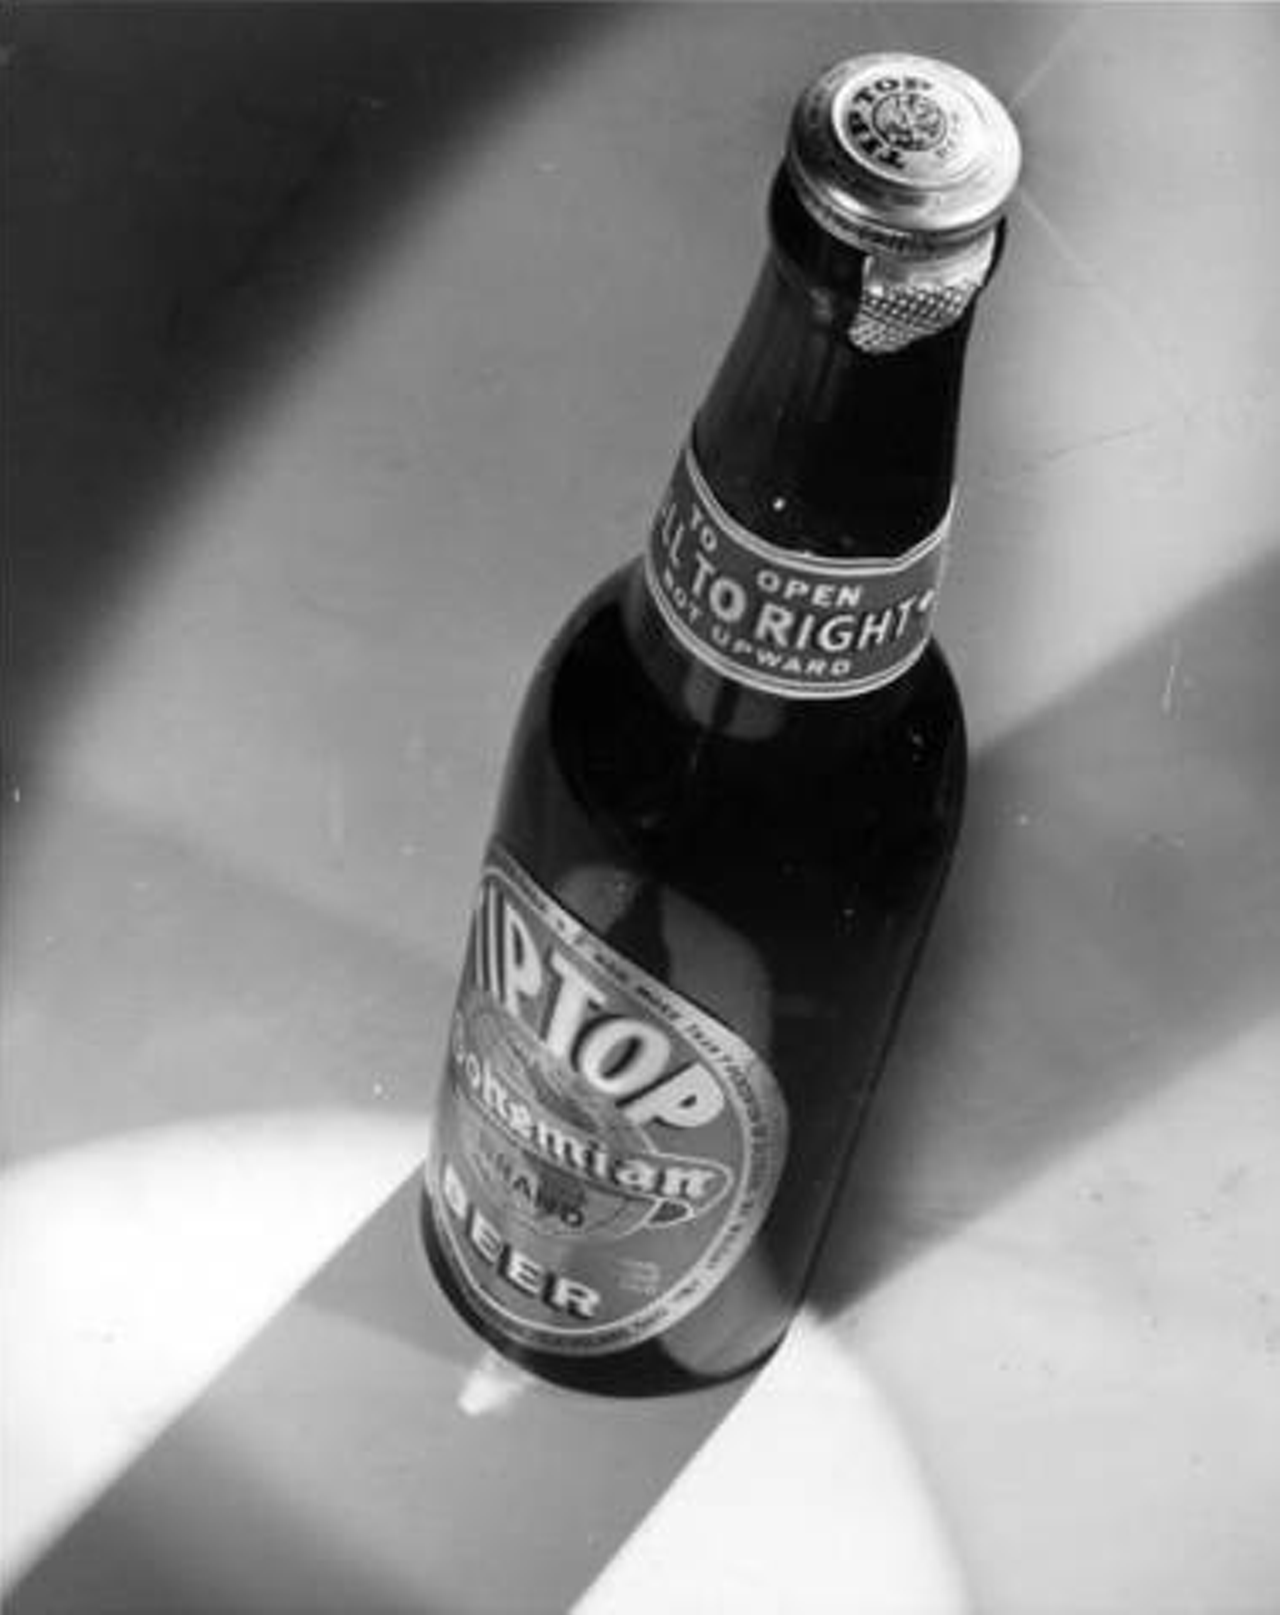 When Sunrise Brewing fazed out in 1939, Tip Top Brewing briefly took its place before being bought out by Carling Brewing Company. The above photo features Tip Top's new aluminum tear-off cap.